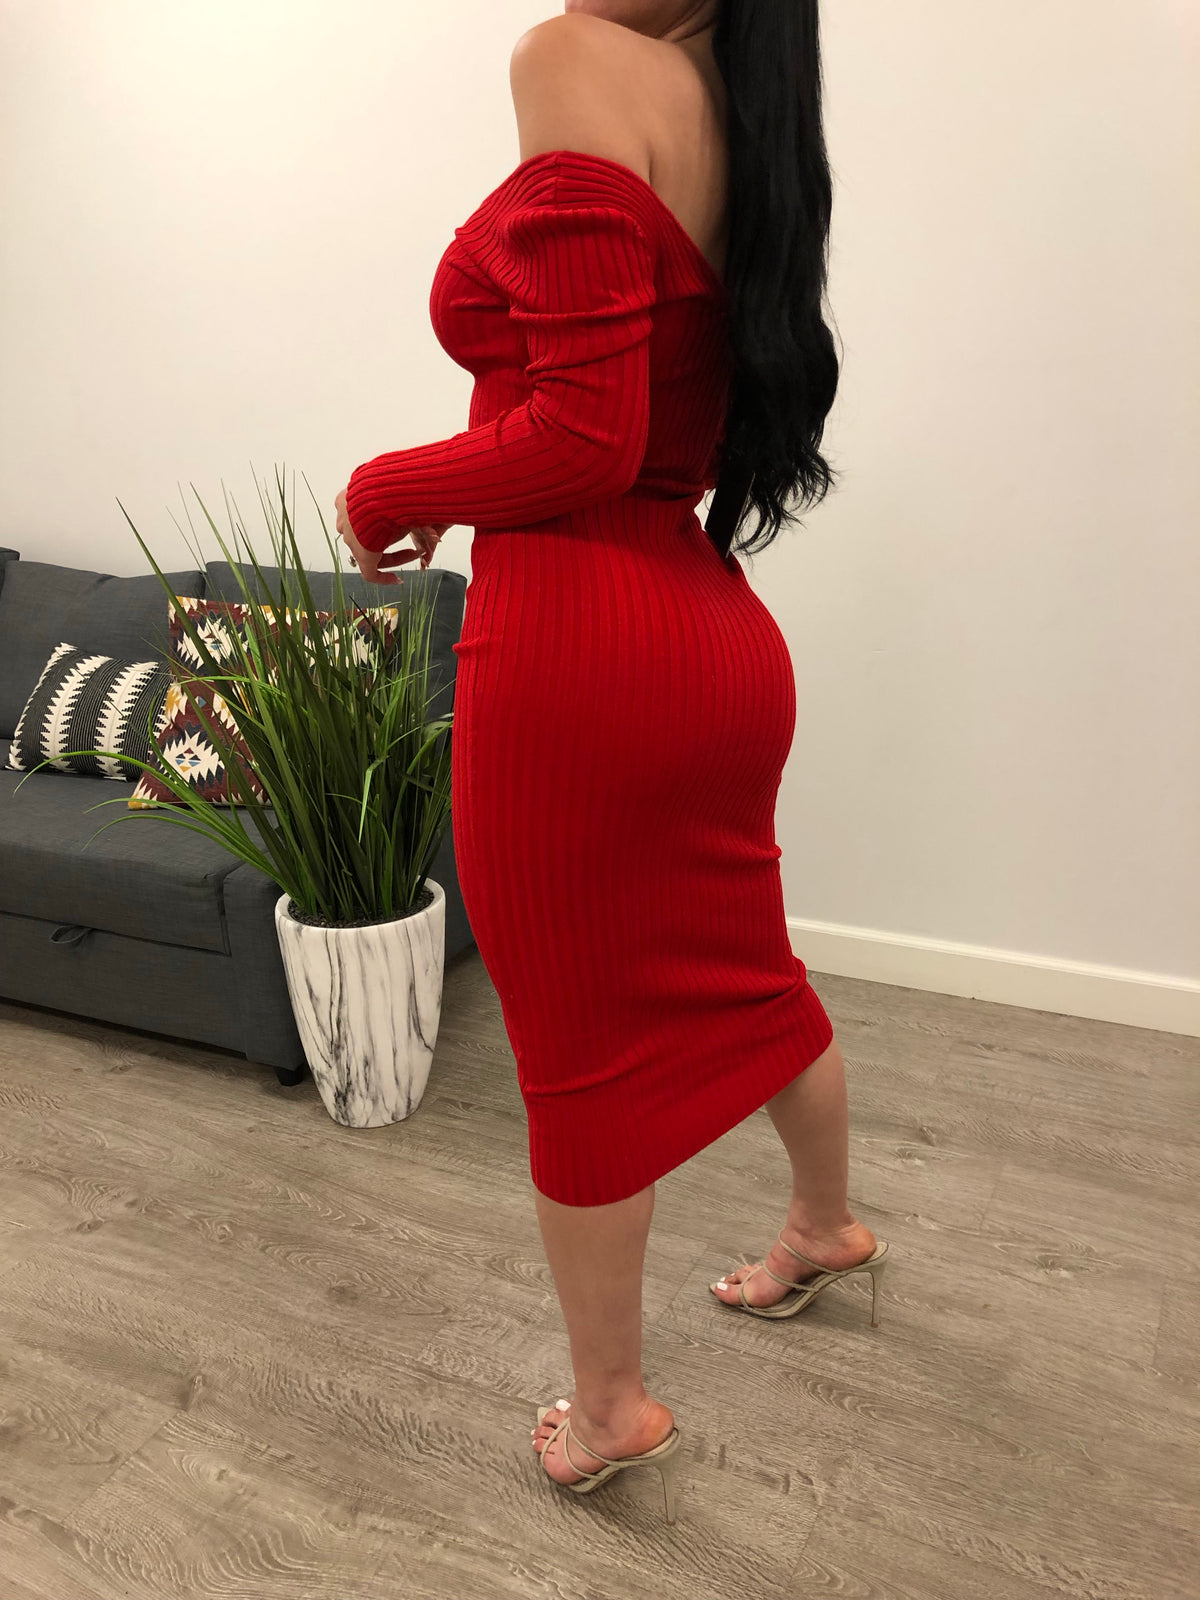 red color long sleeve off the shoulder knit dress. dress shows no cleavage. dress length is just past knees